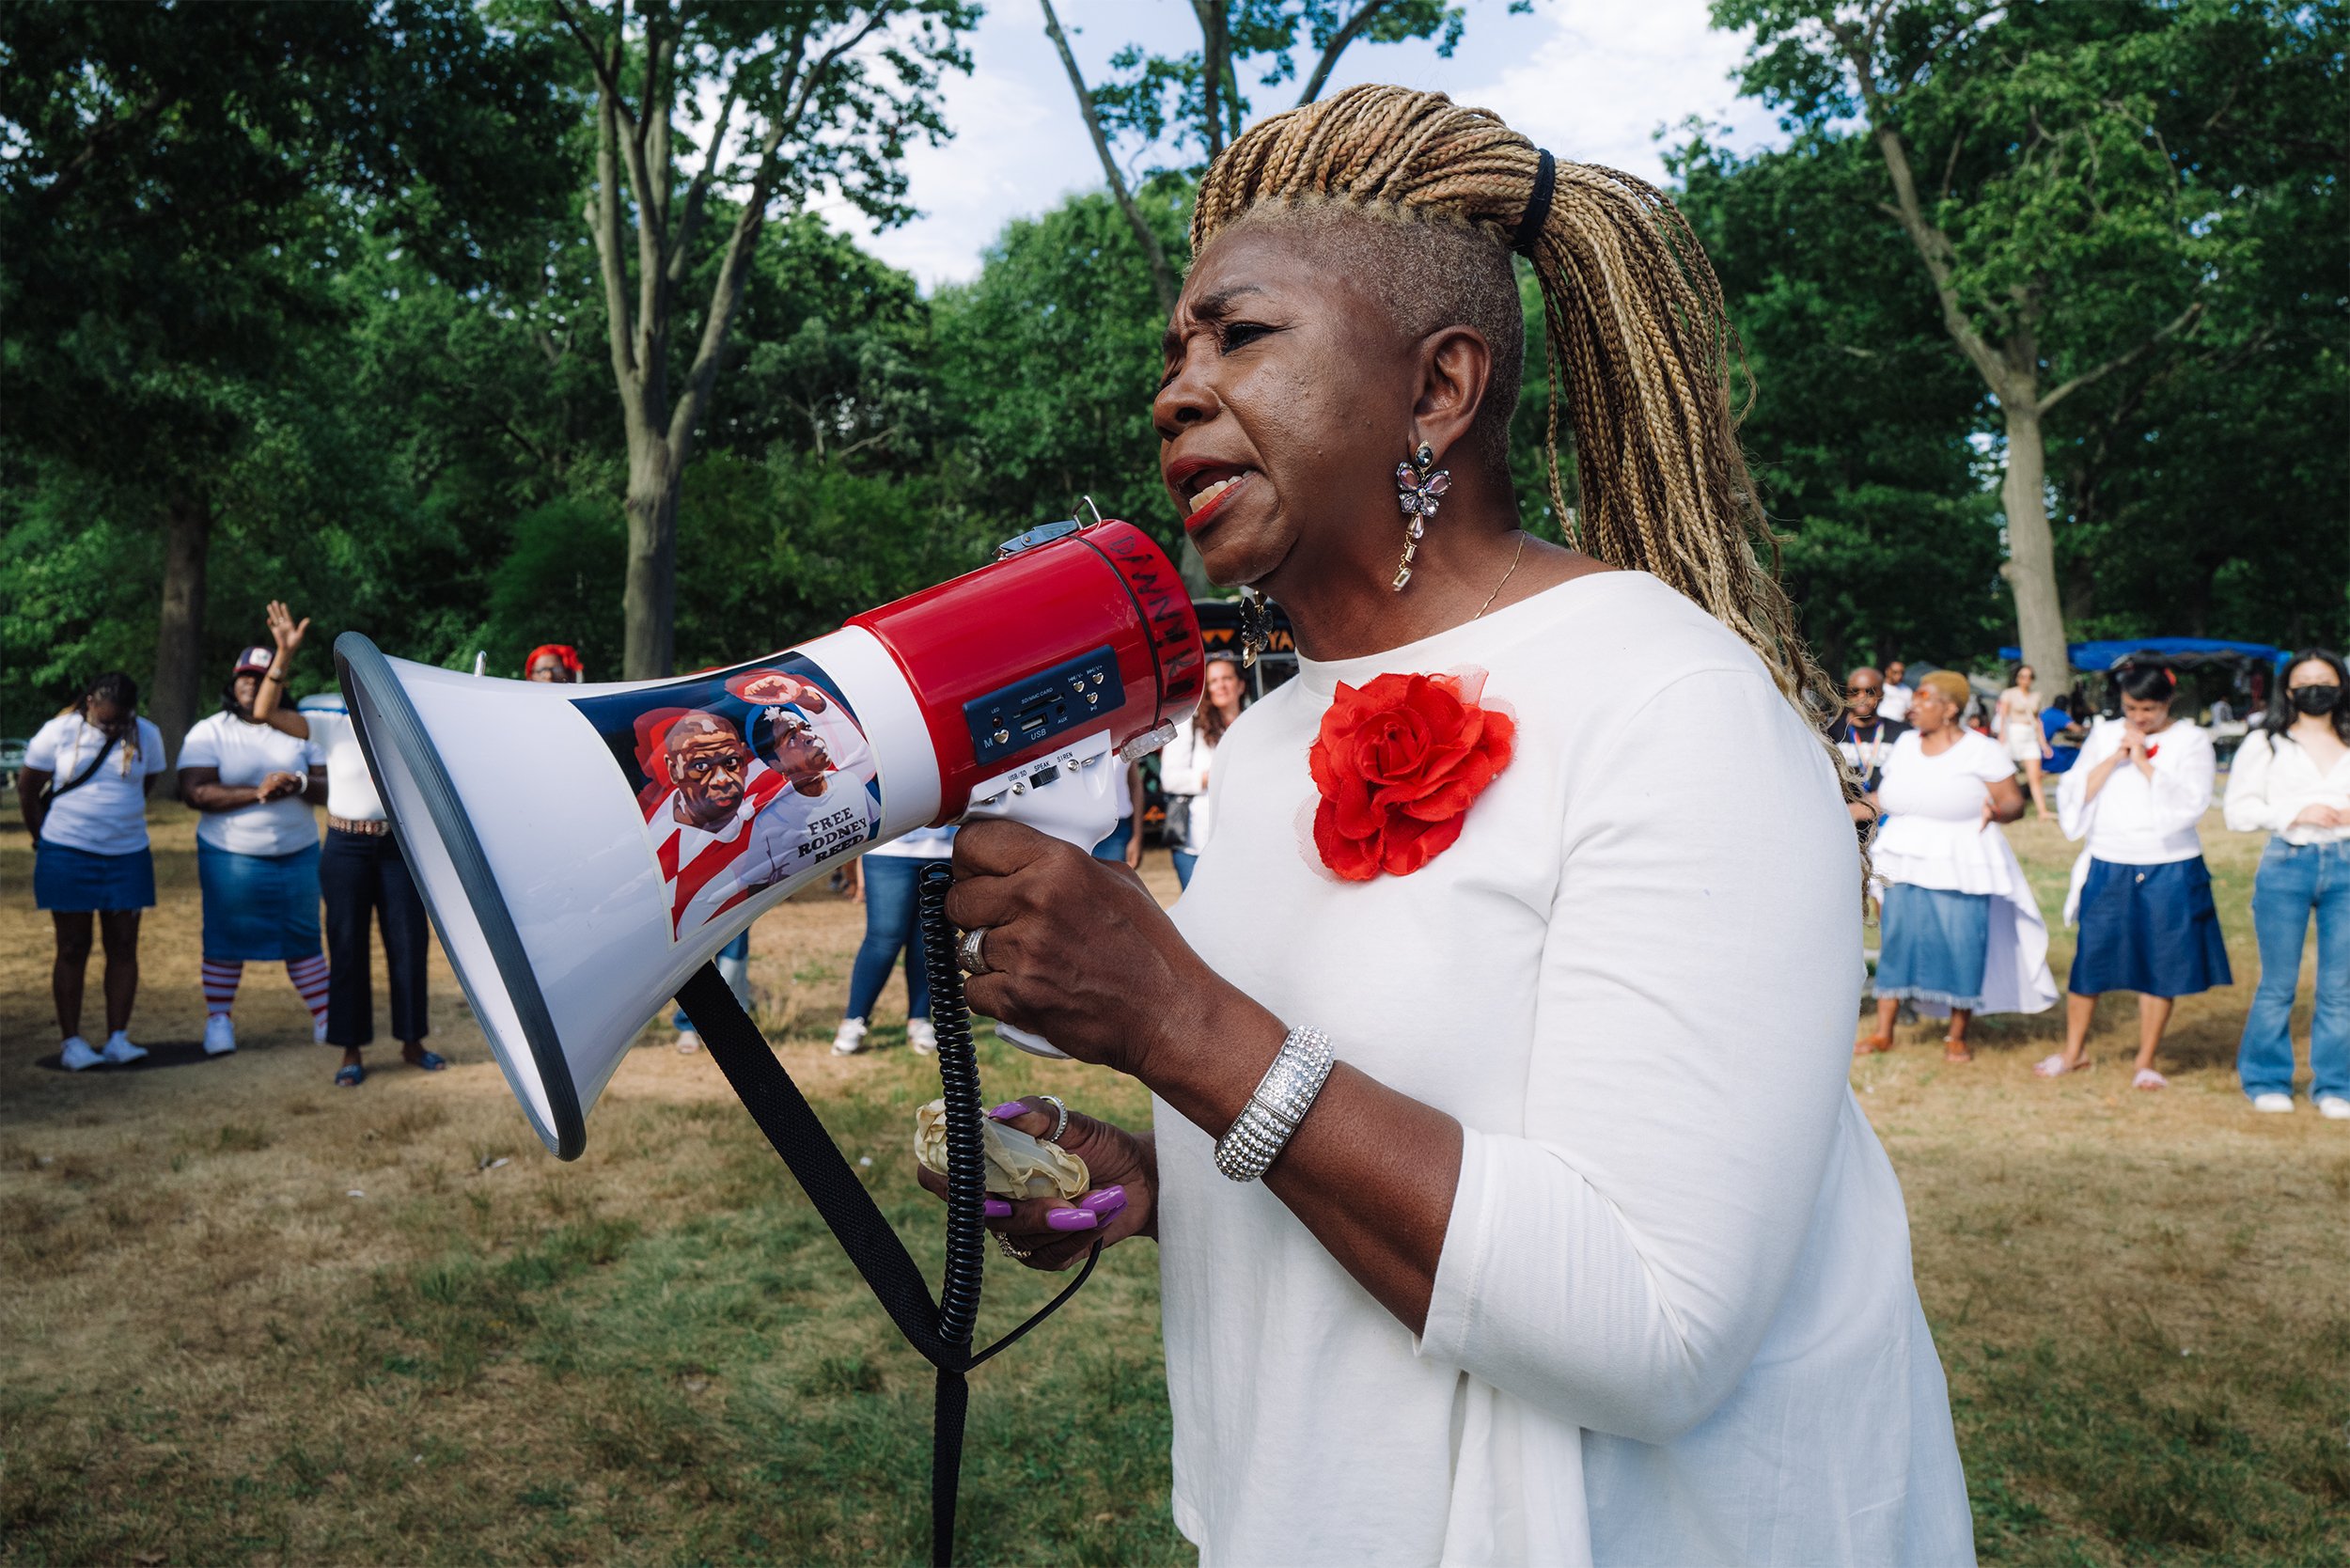  Pastor Sharon Cornelius leads a prayer before performing artists take the stage at the 2022 Gospel Fest in Franklin Park in Boston, Mass. on August 7, 2022. 